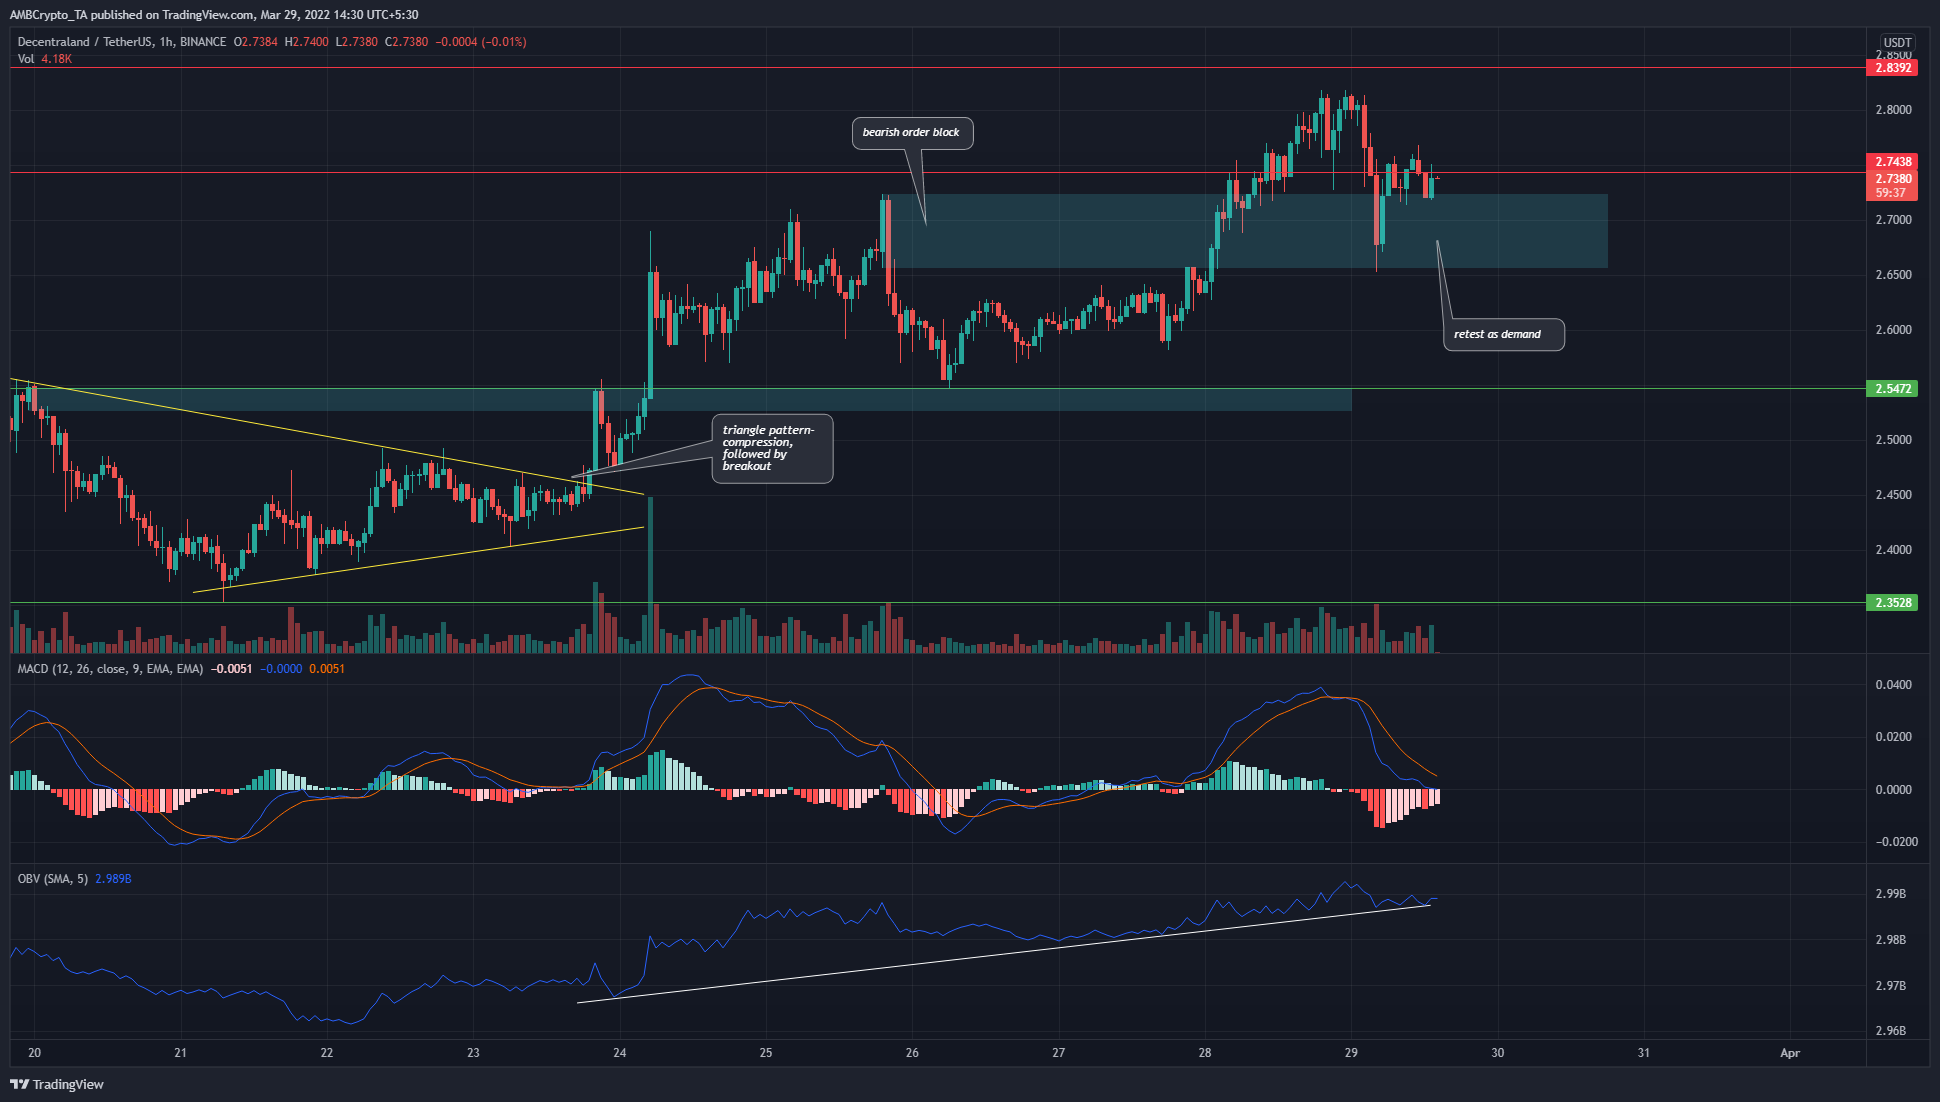 Ethereum, Axie Infinity, Cosmos, Decentraland Price Analysis: 29 March